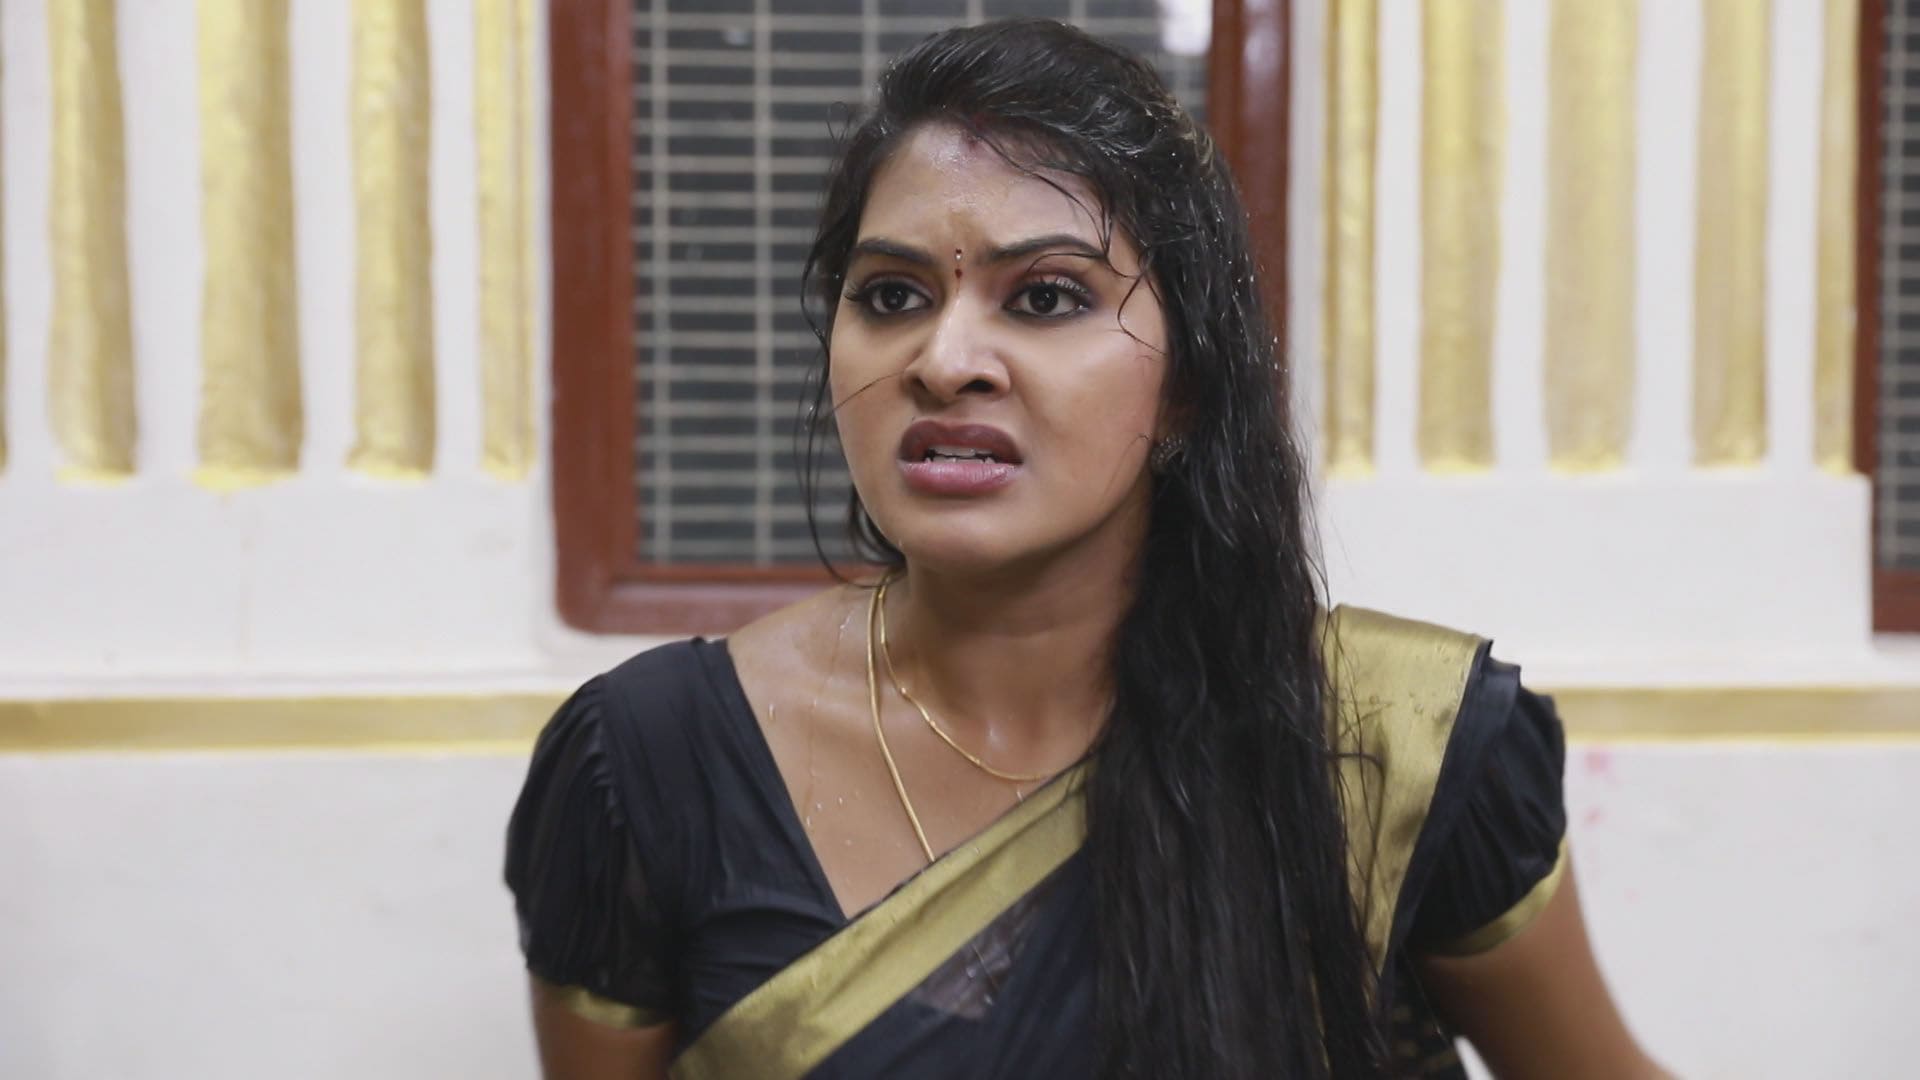 Meenakshi To End Her Life